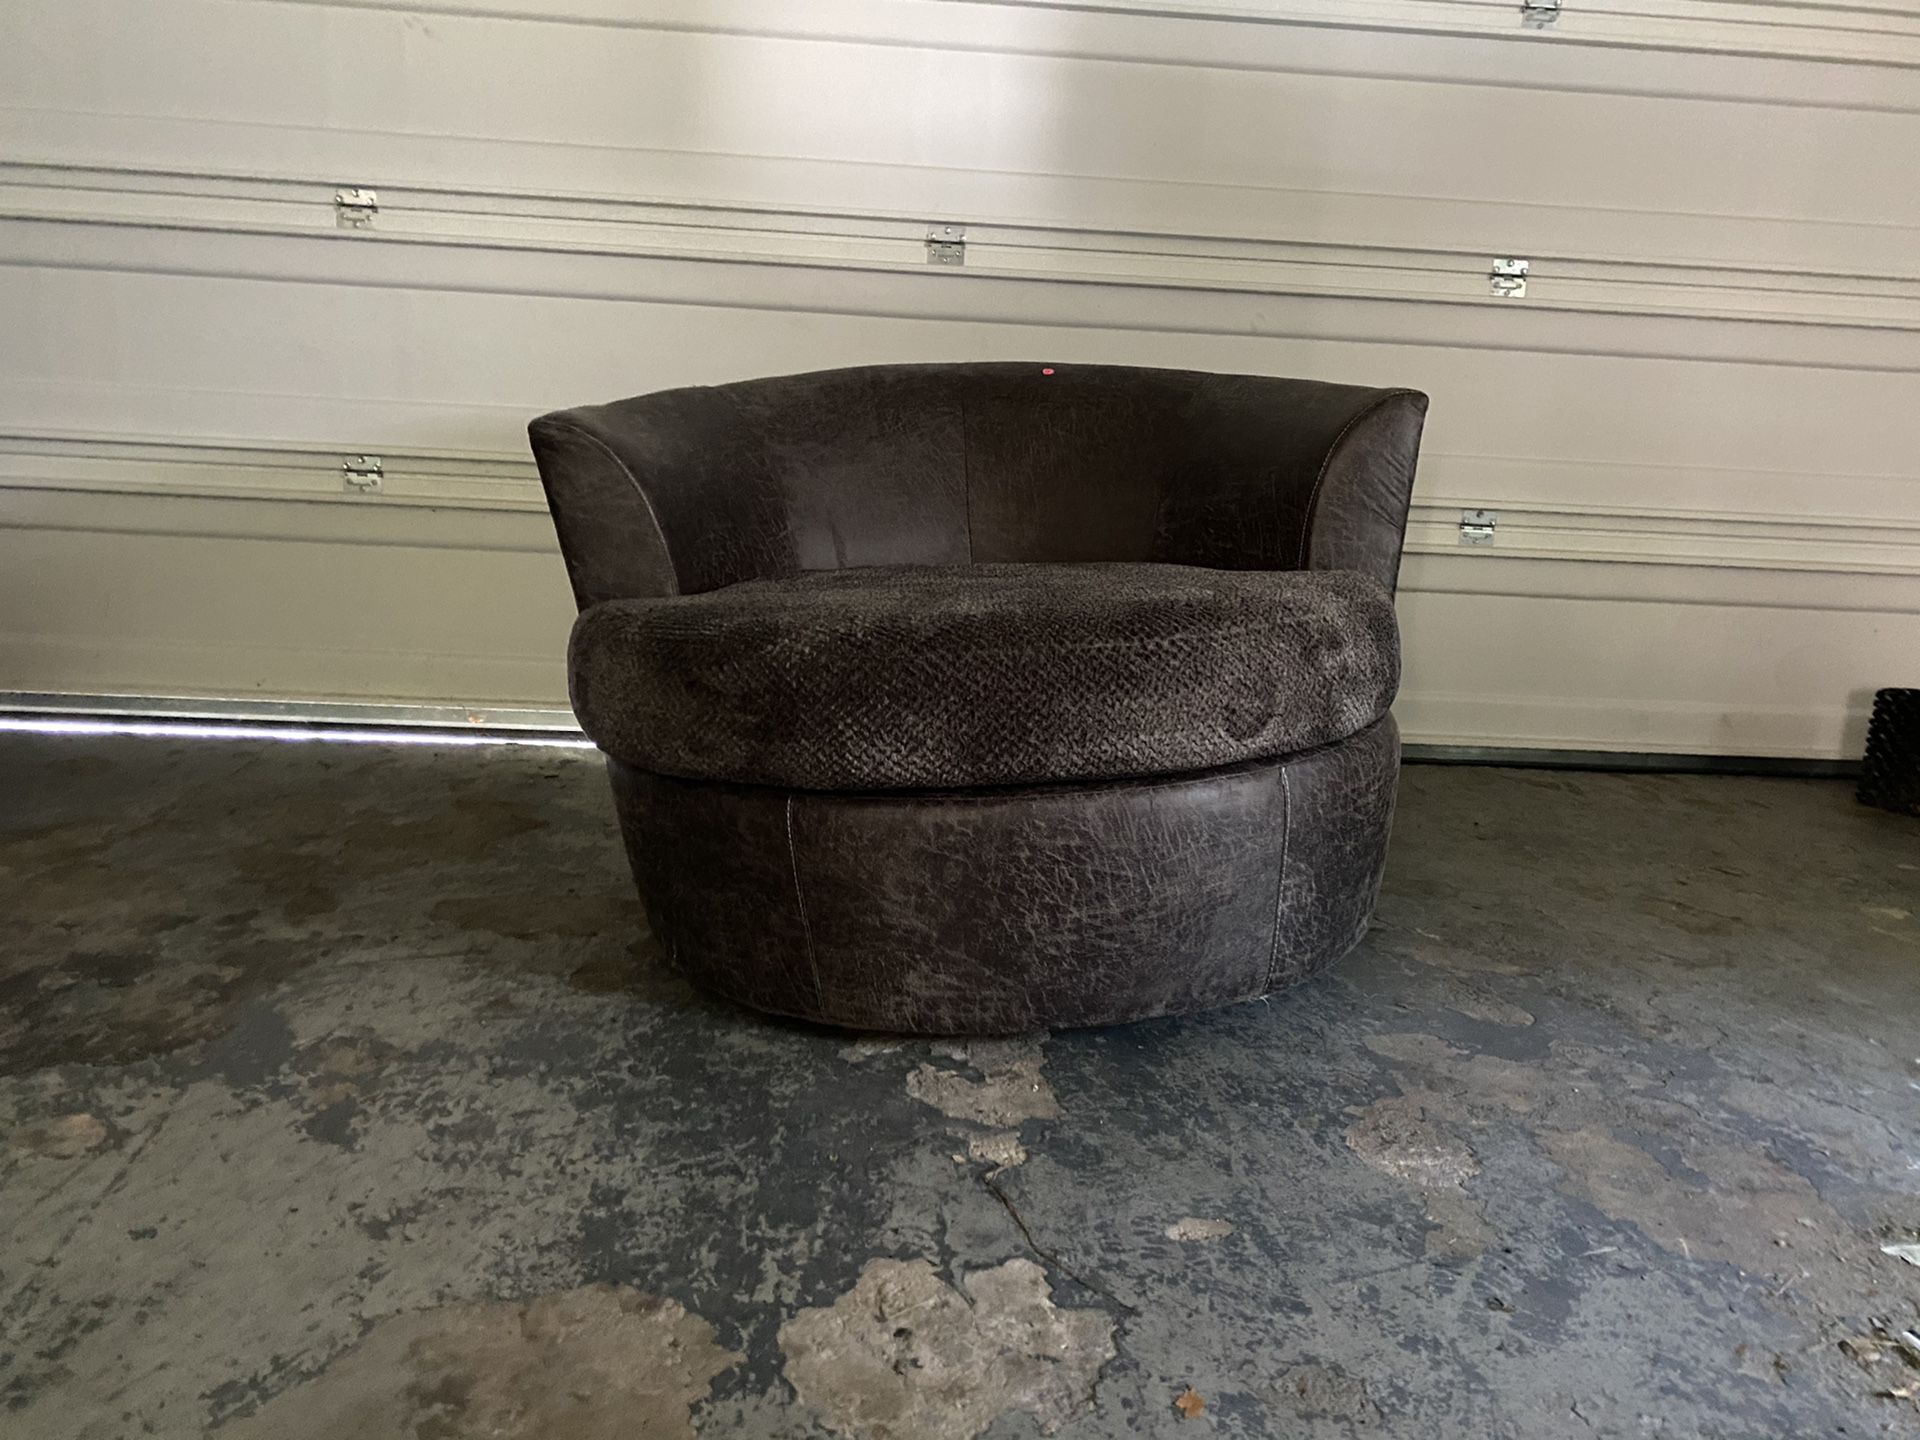 Round chair from Value City